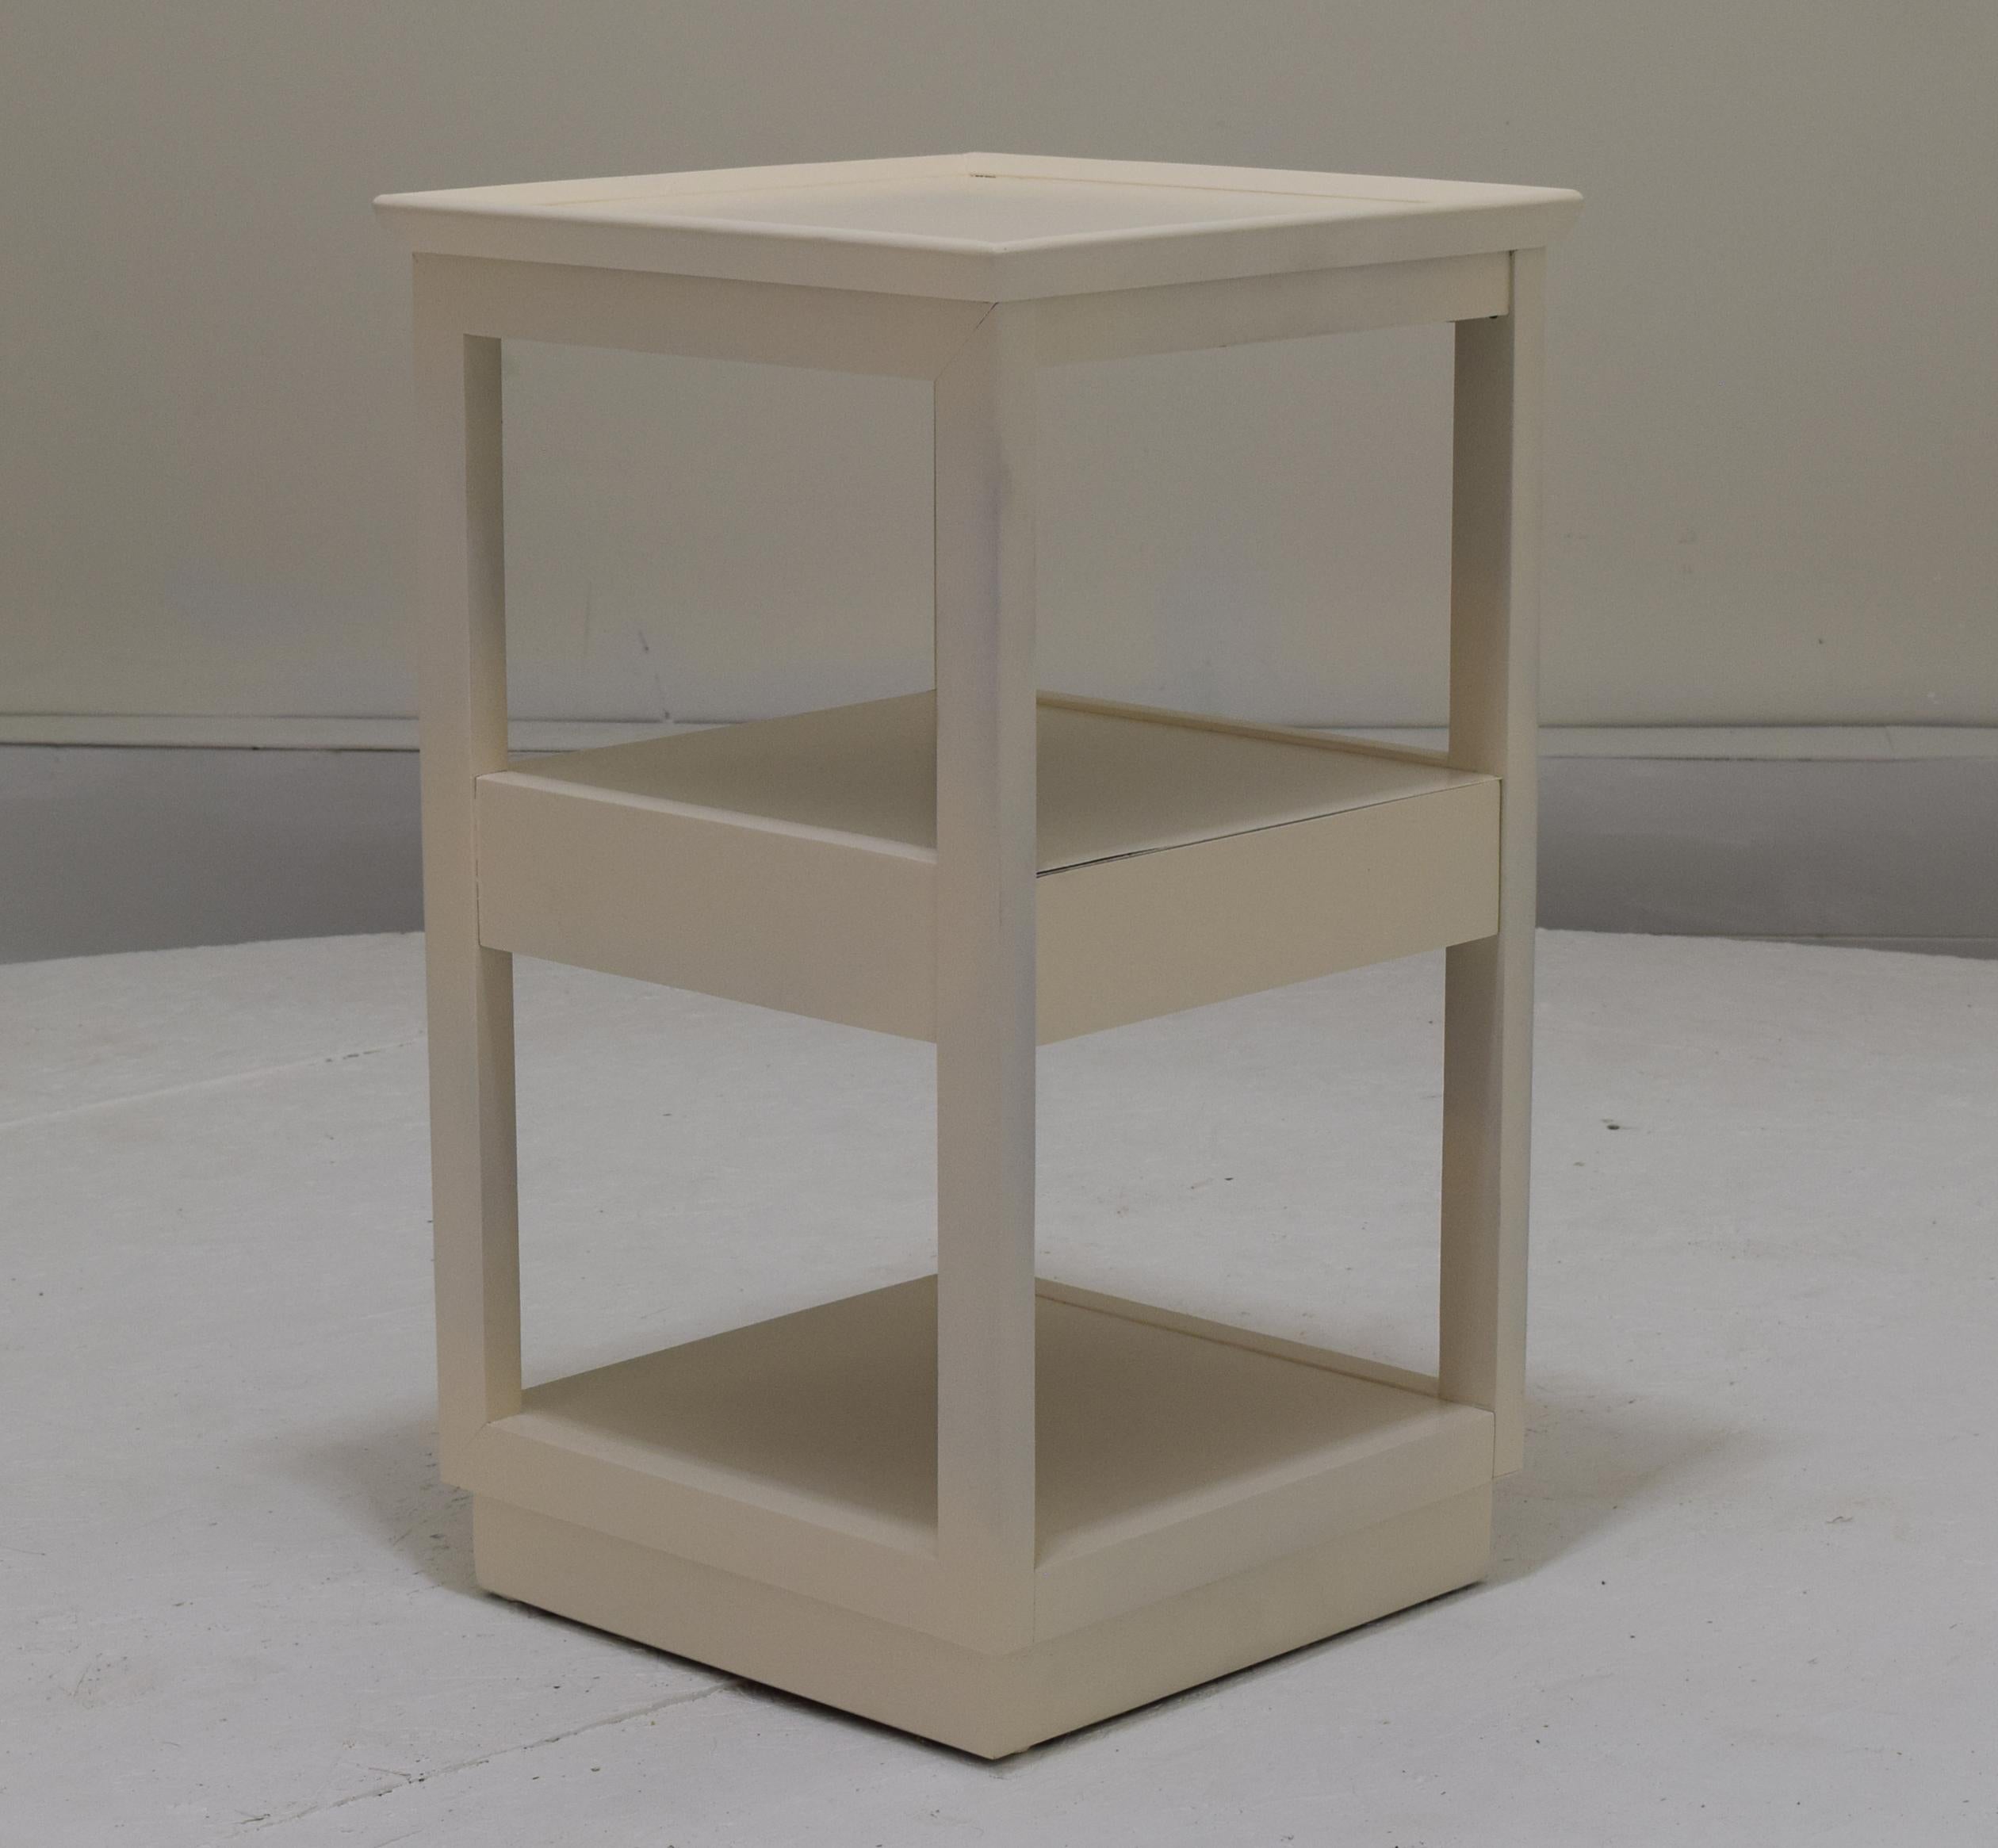 Lamp table with drawer, Drexel, Edward Wormley, 1949, USA, white lacquer, elm.
Designed by Edward Wormley for Drexel, the precedent series by Drexel is one of the few designs Wormley performed outside of Dunbar. This table was produced in 1949 and